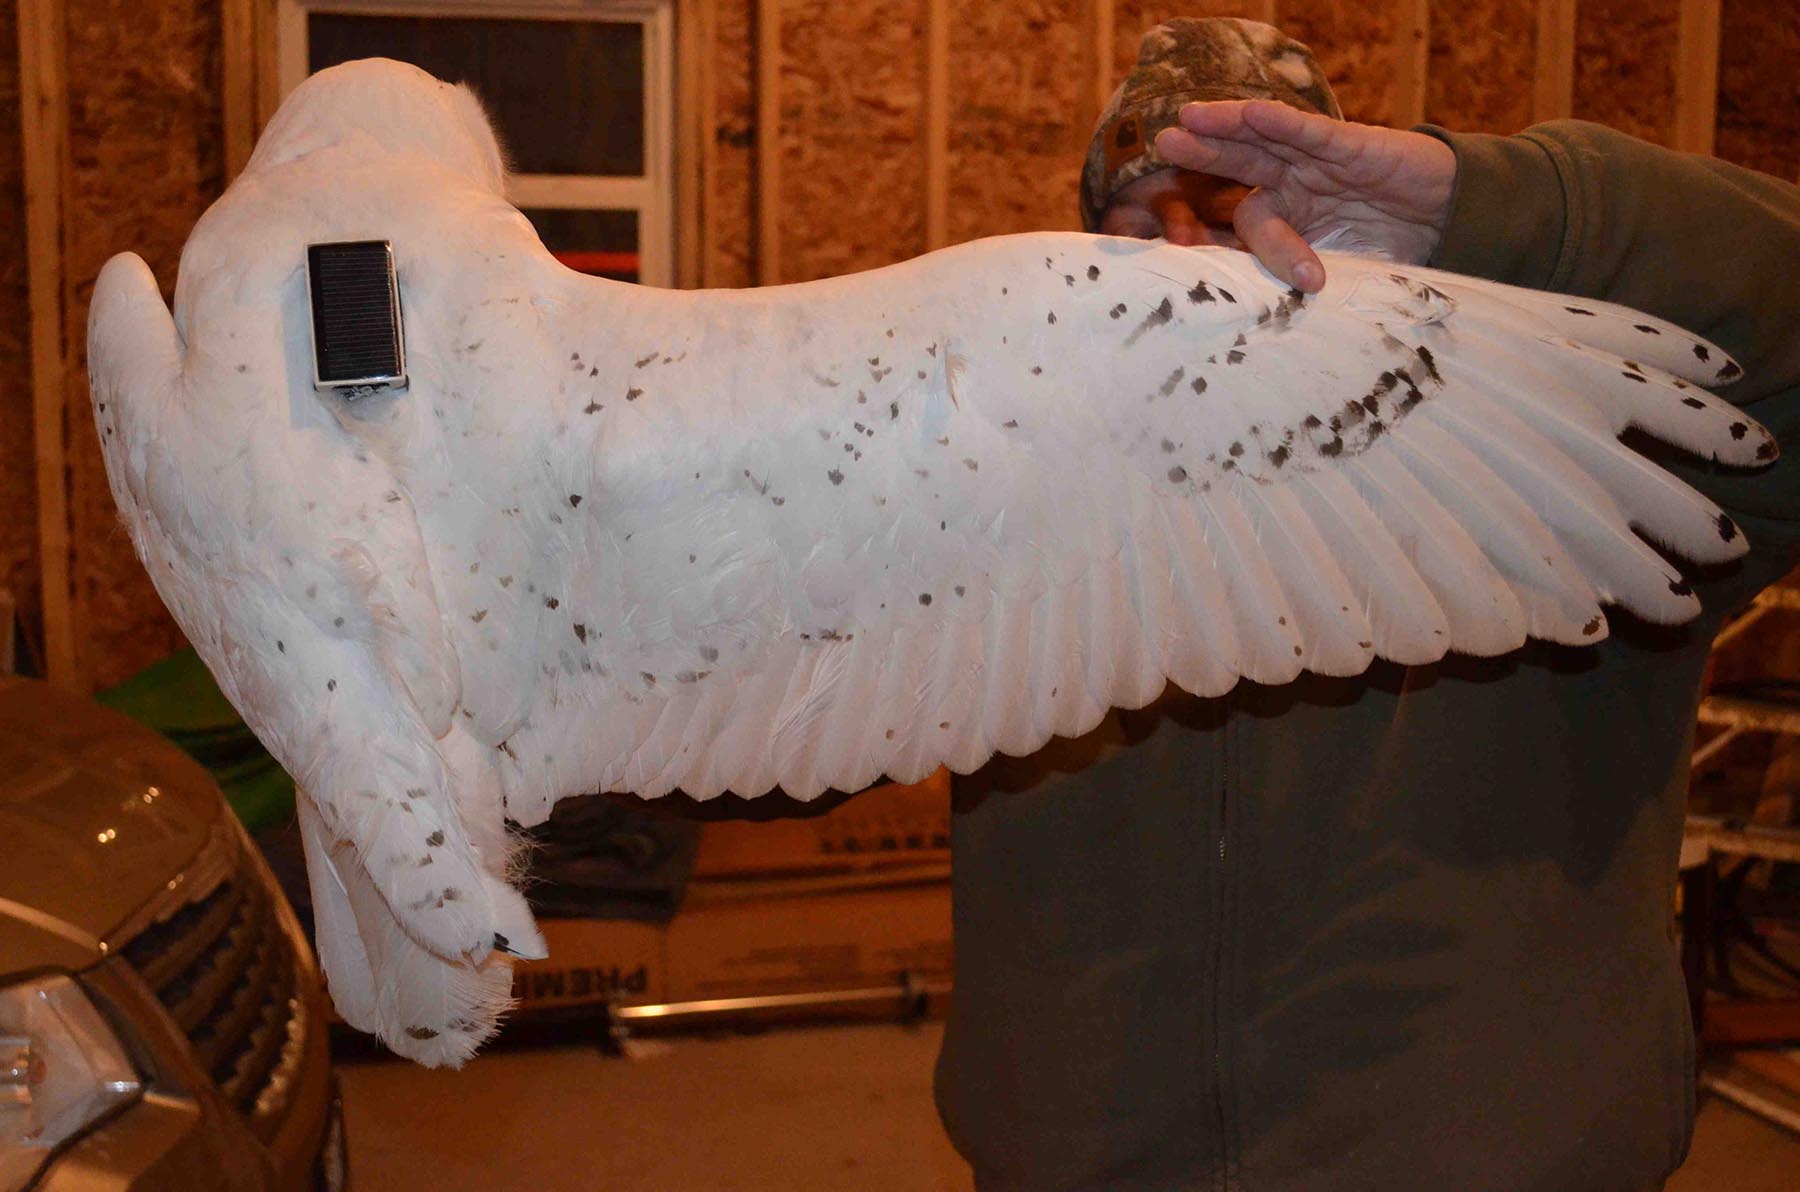 Tom McDonald shows the striking plumage of Chaumont, an adult male snowy owl Tom tagged near the upstate New York town of the same name (©Tom McDonald)